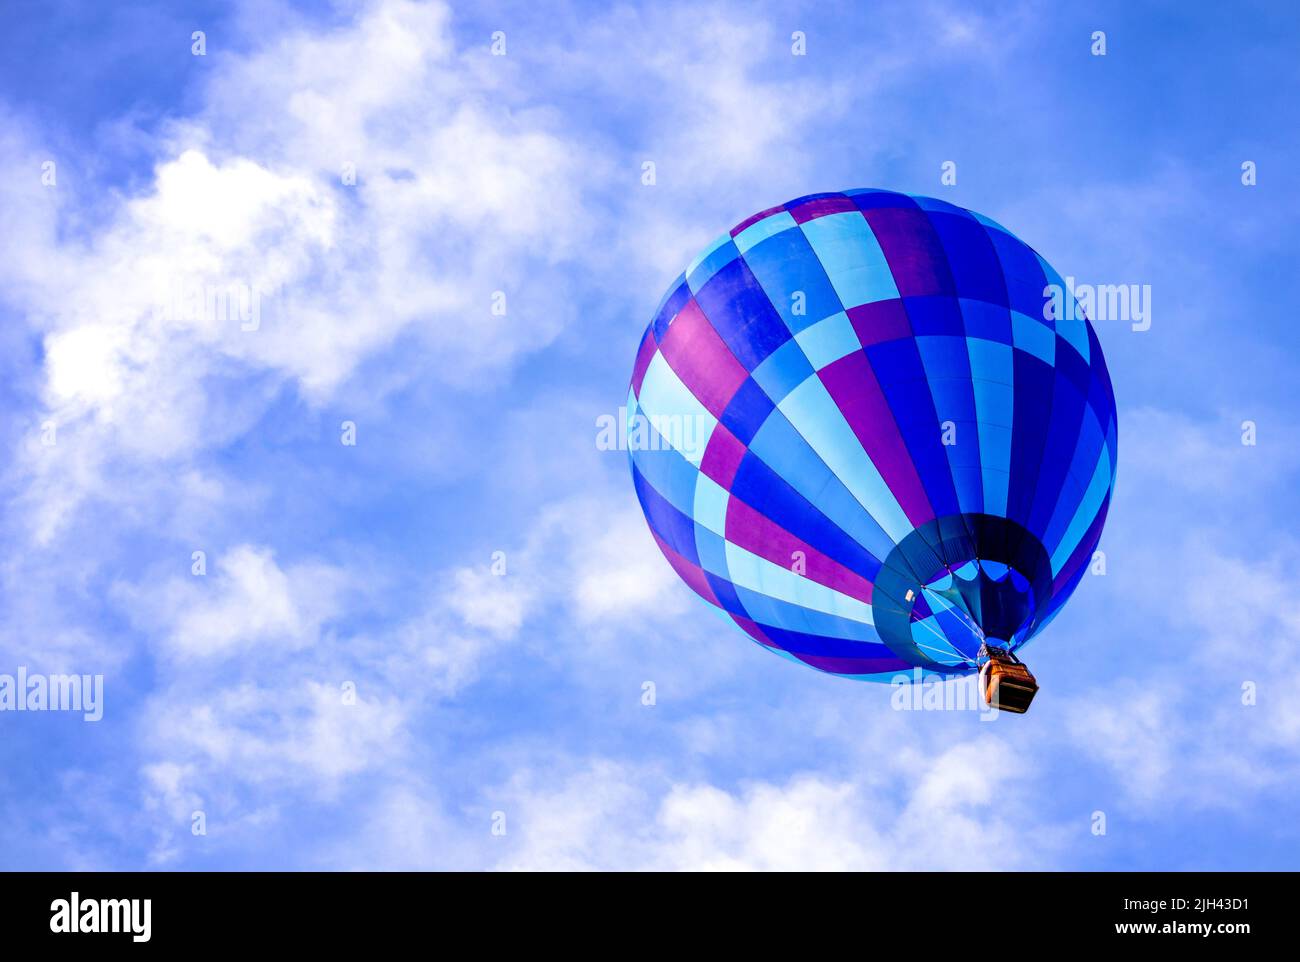 Large blue hot air balloon floats in a cloudy blue sky Stock Photo